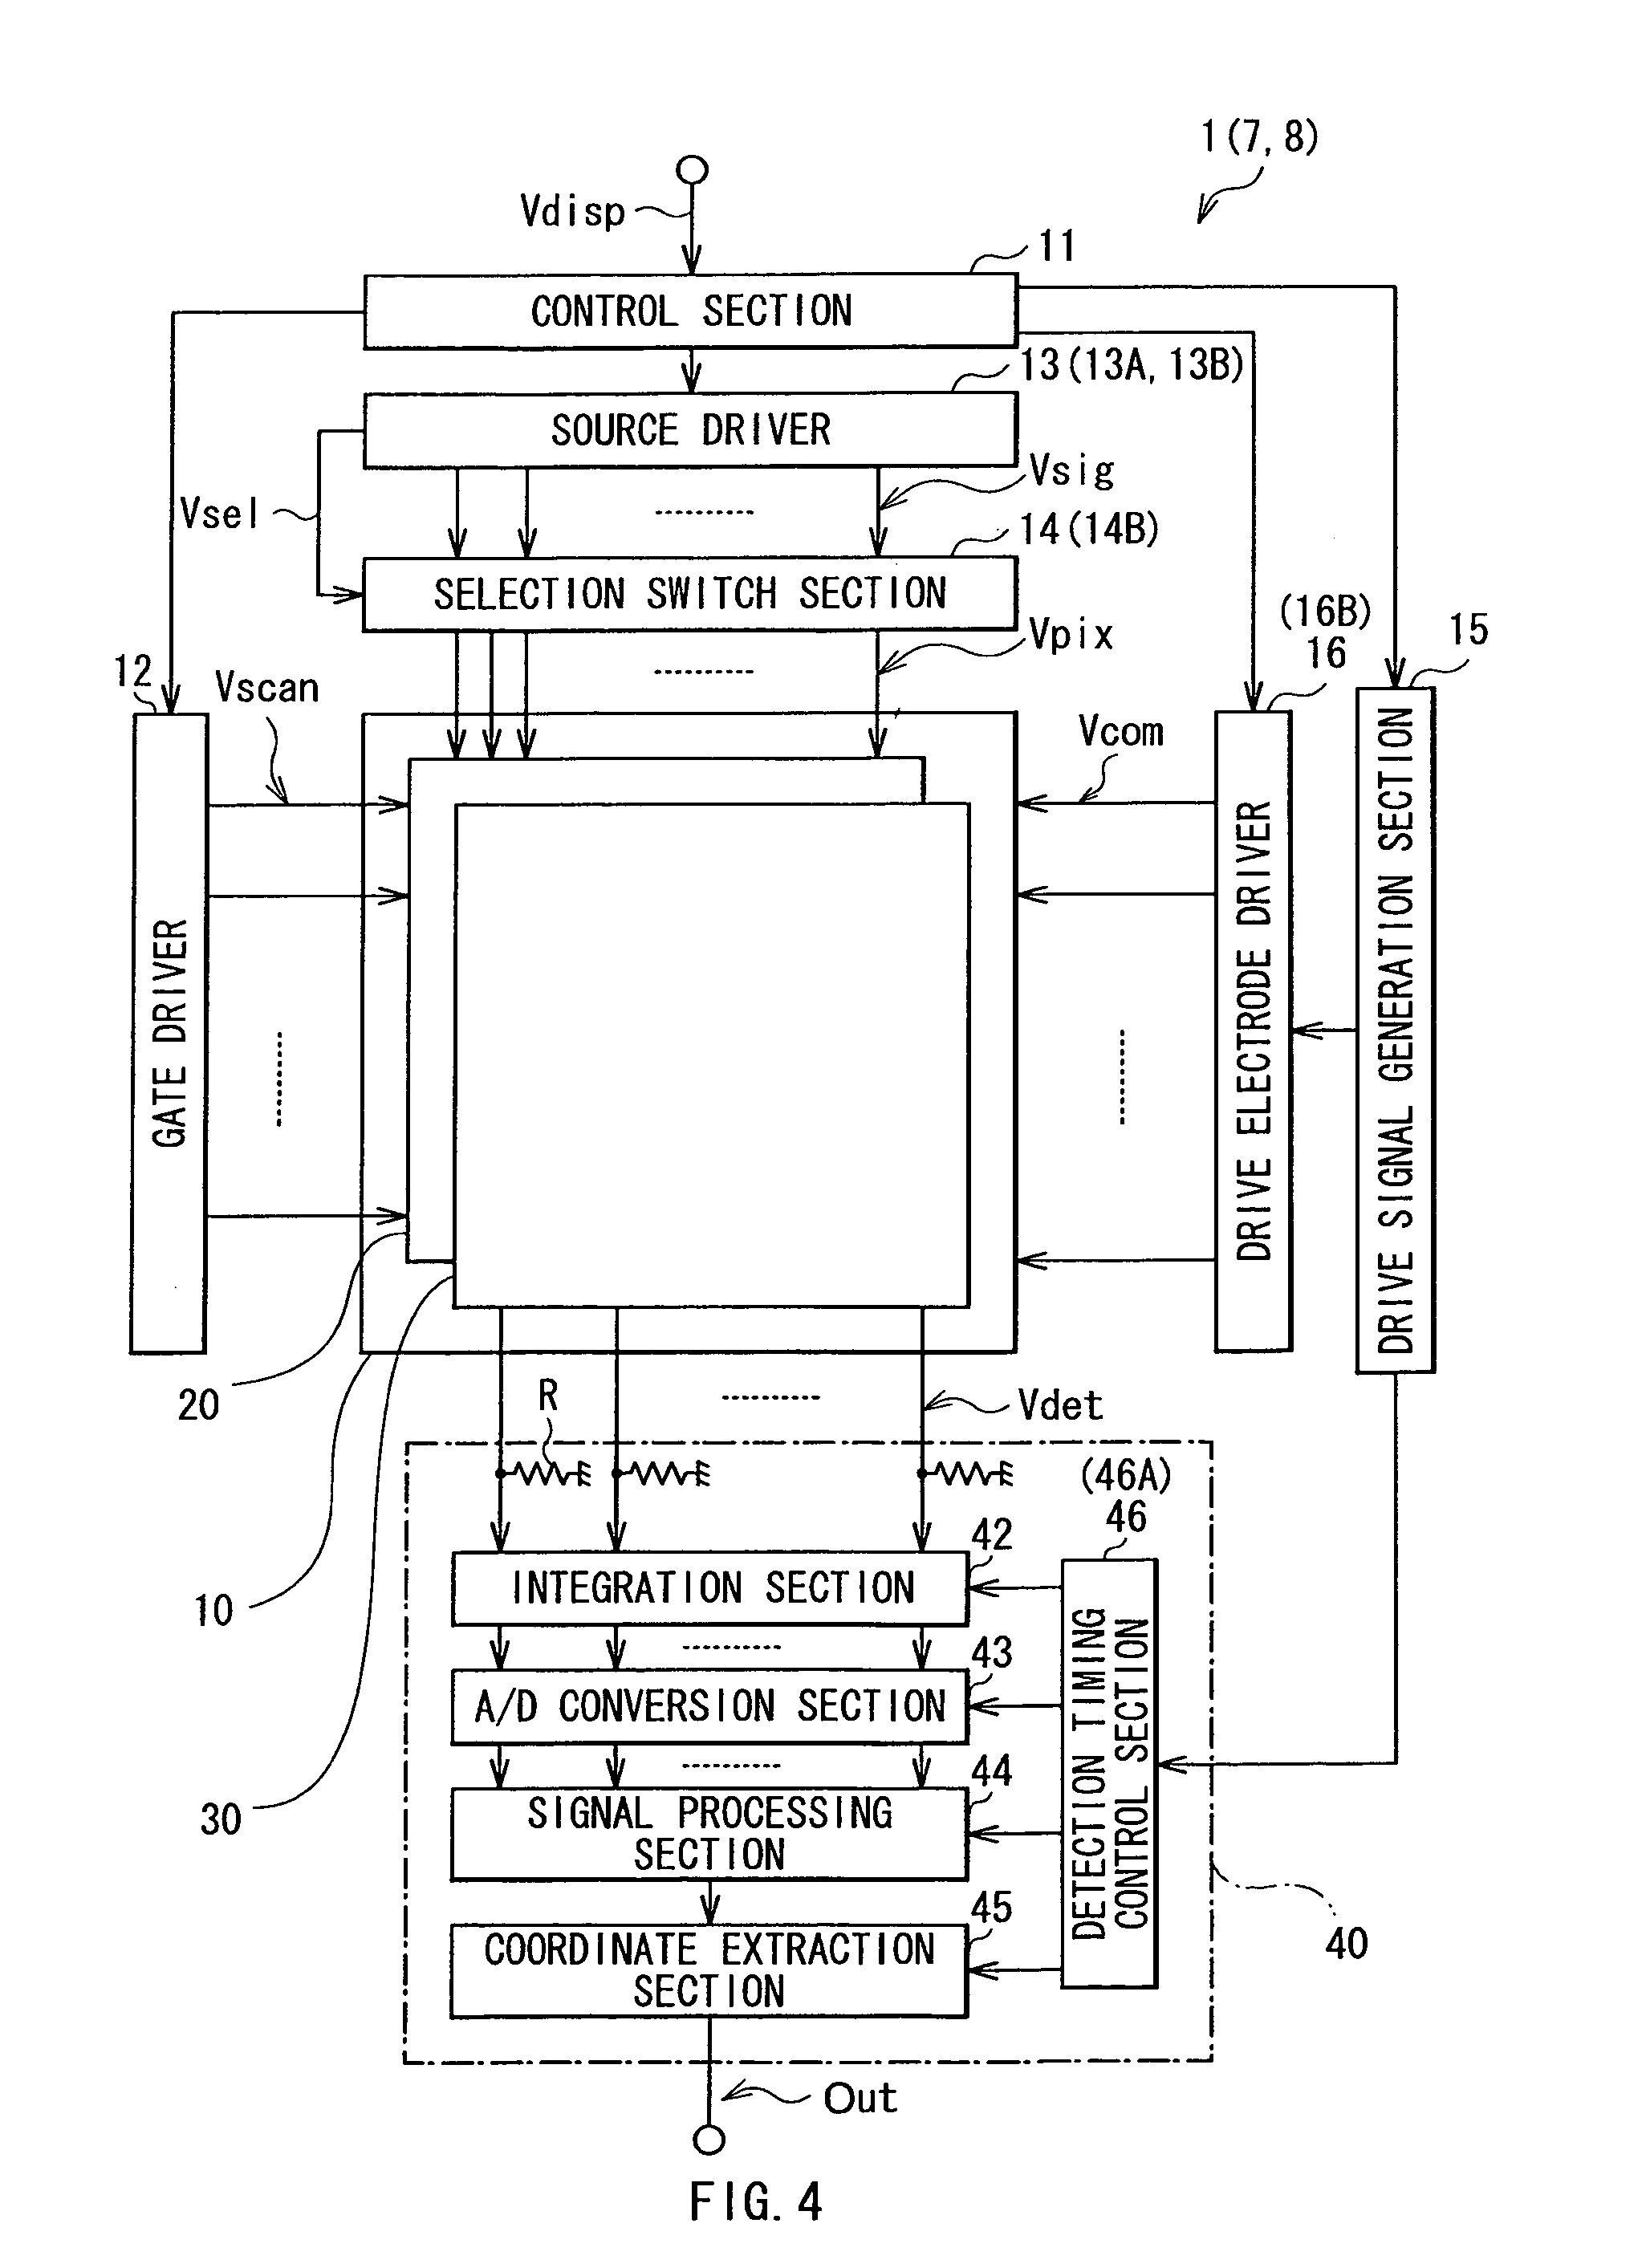 Display unit with touch detection function and electronic unit